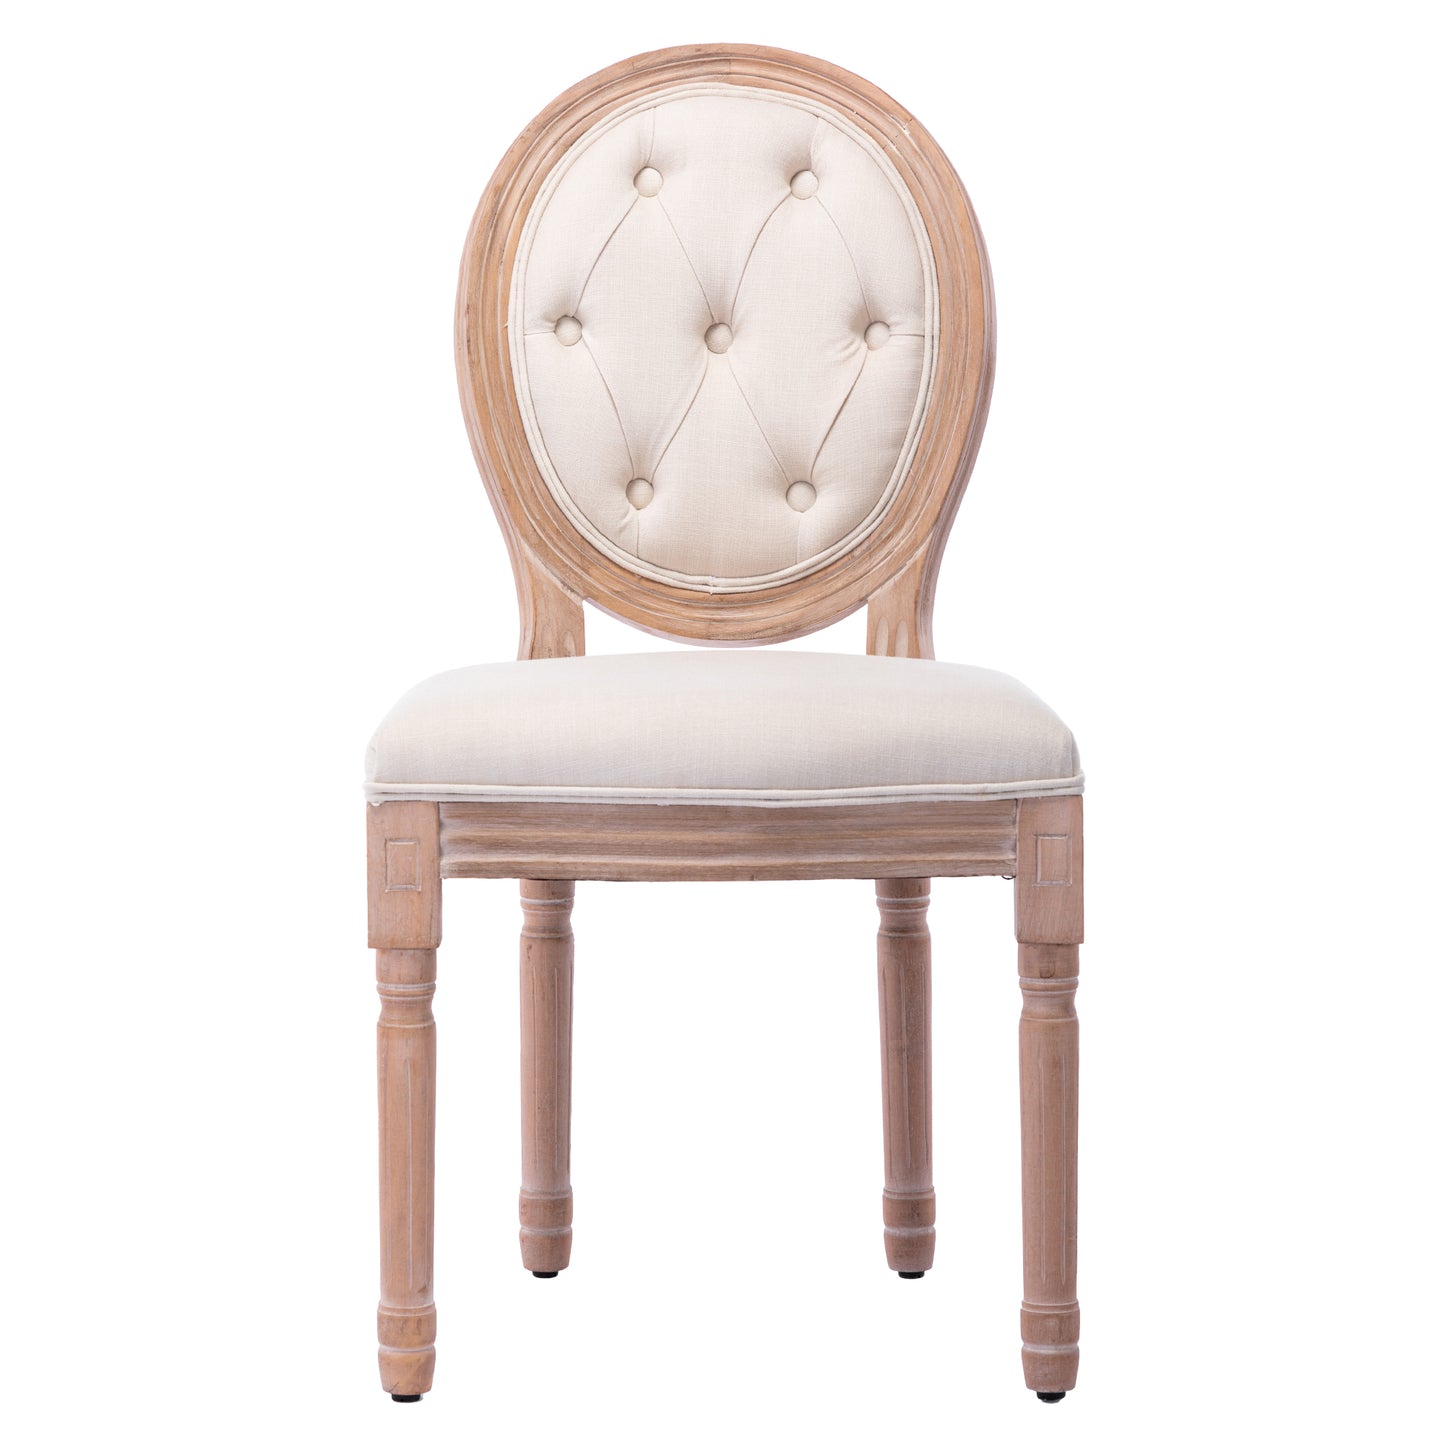 SogesPower Upholstered Fabrice French Dining Chair with rubber legs,Set of 2- Beige+Fabric